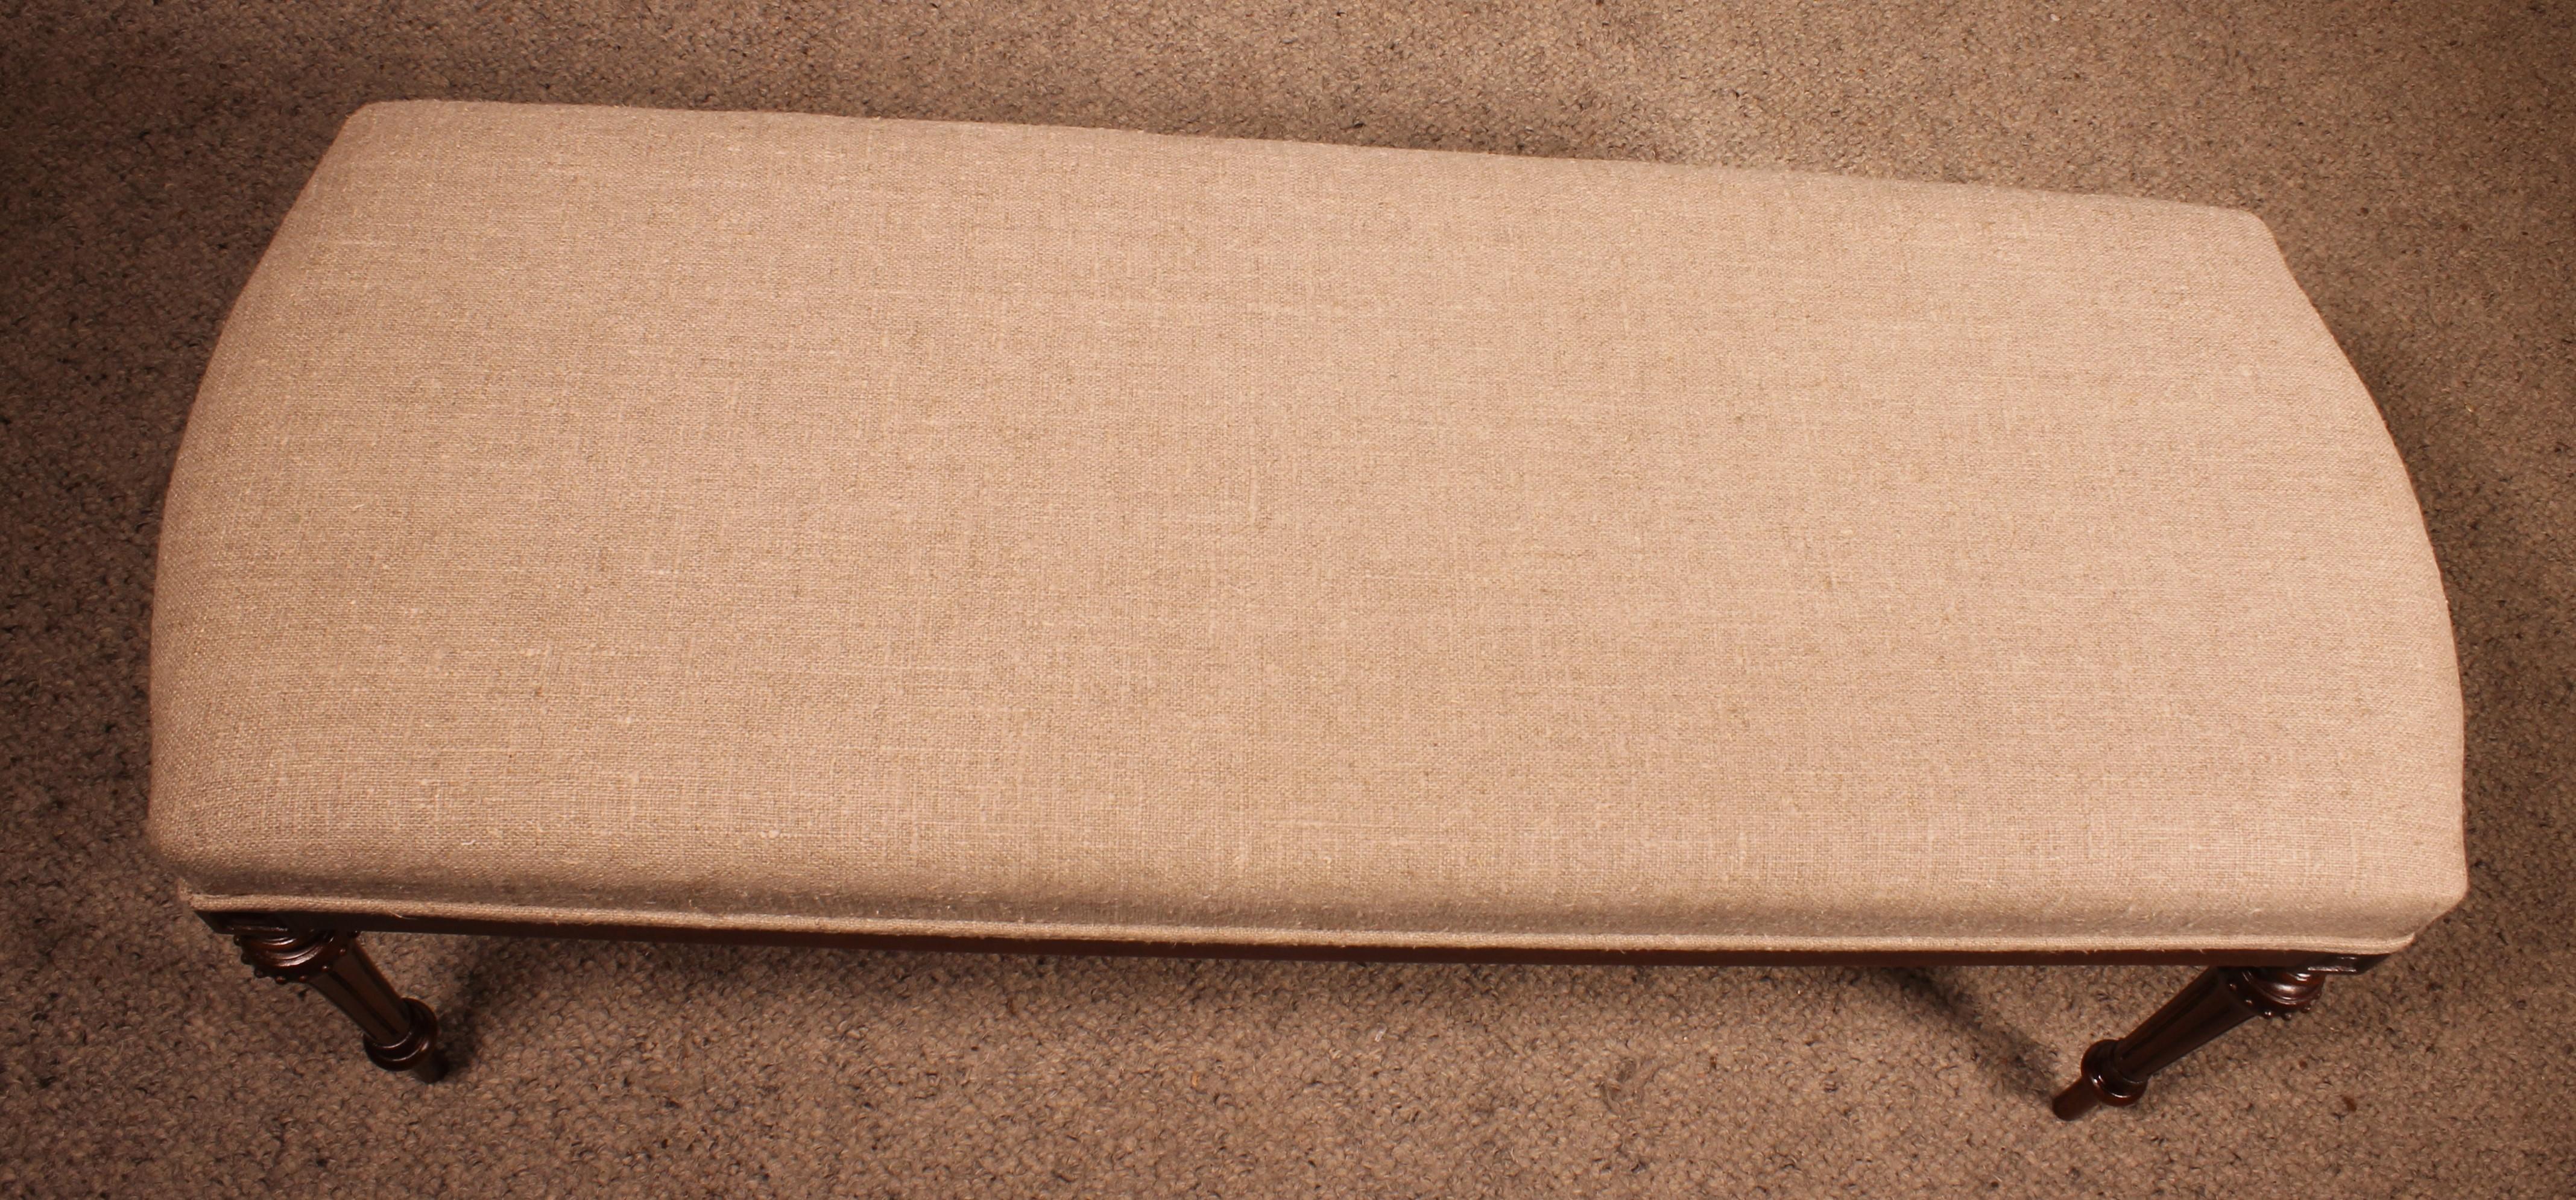 Mahogany Bench From The 19th Century Covered With A Linen Fabric 6